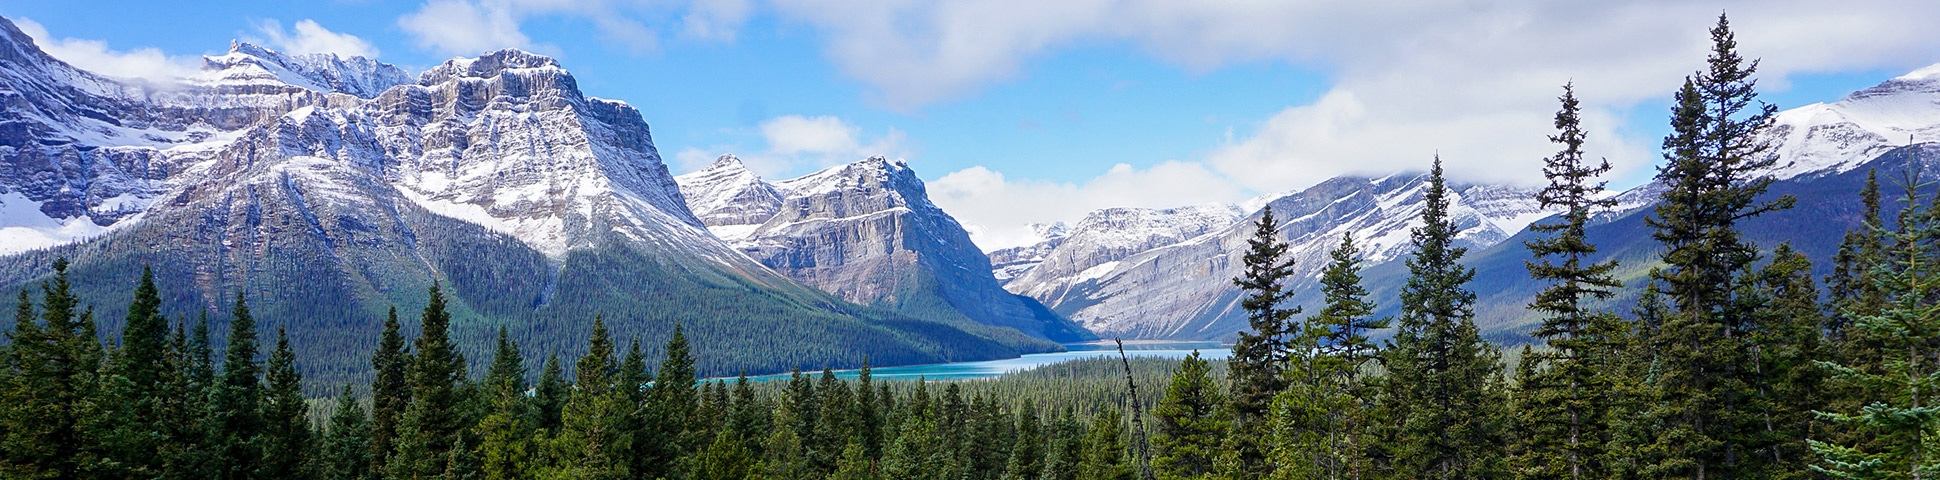 Panorama on Lake Louise to Bow Summit and Back road biking route in Banff National Park